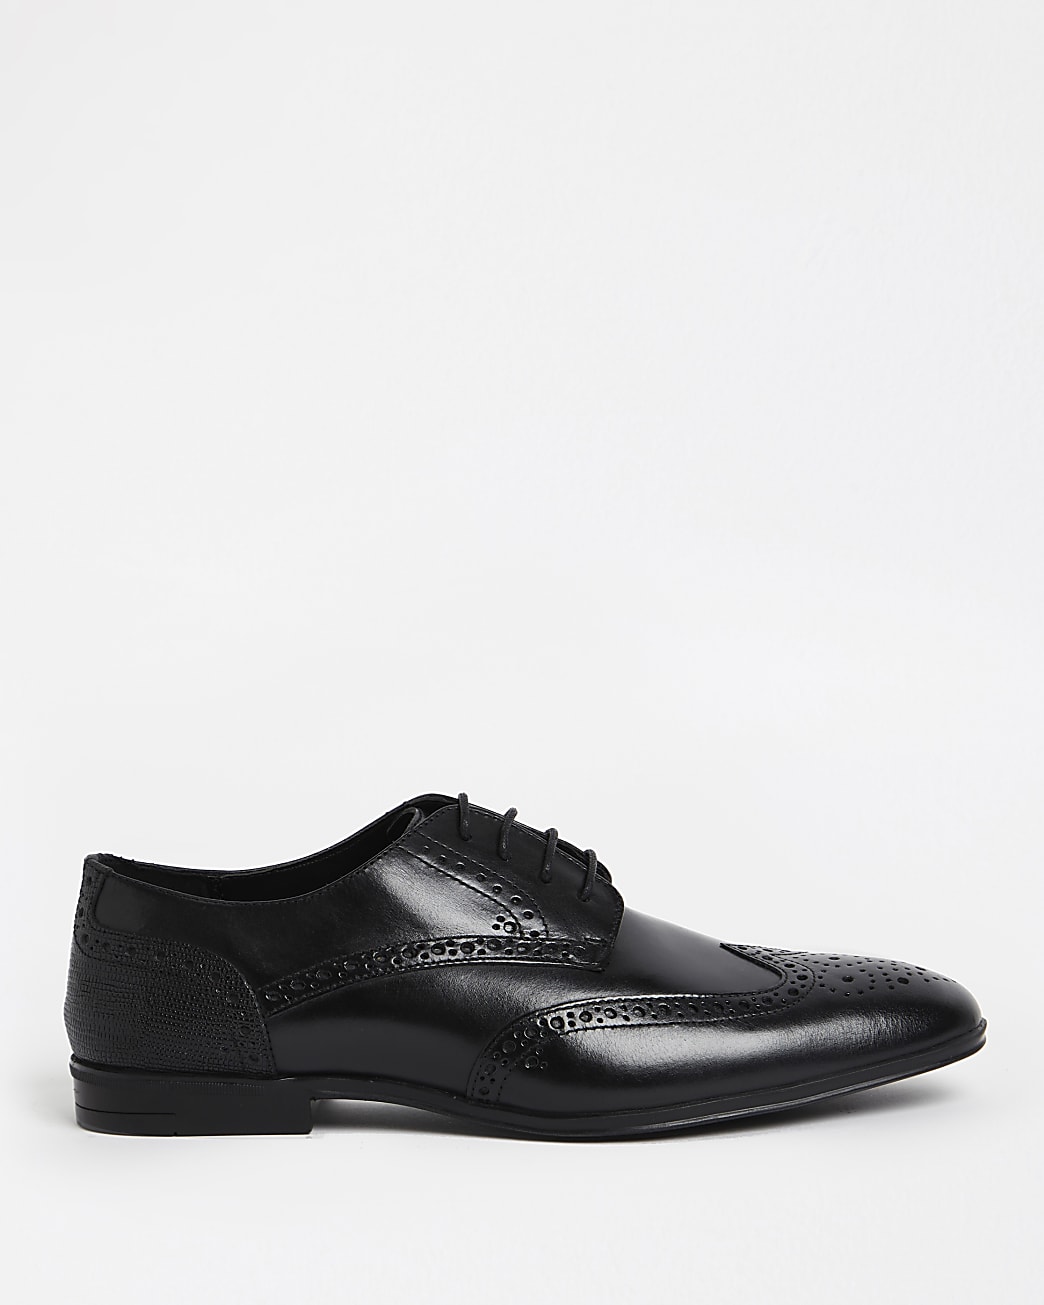 Big & tall black wide fit leather derby shoes